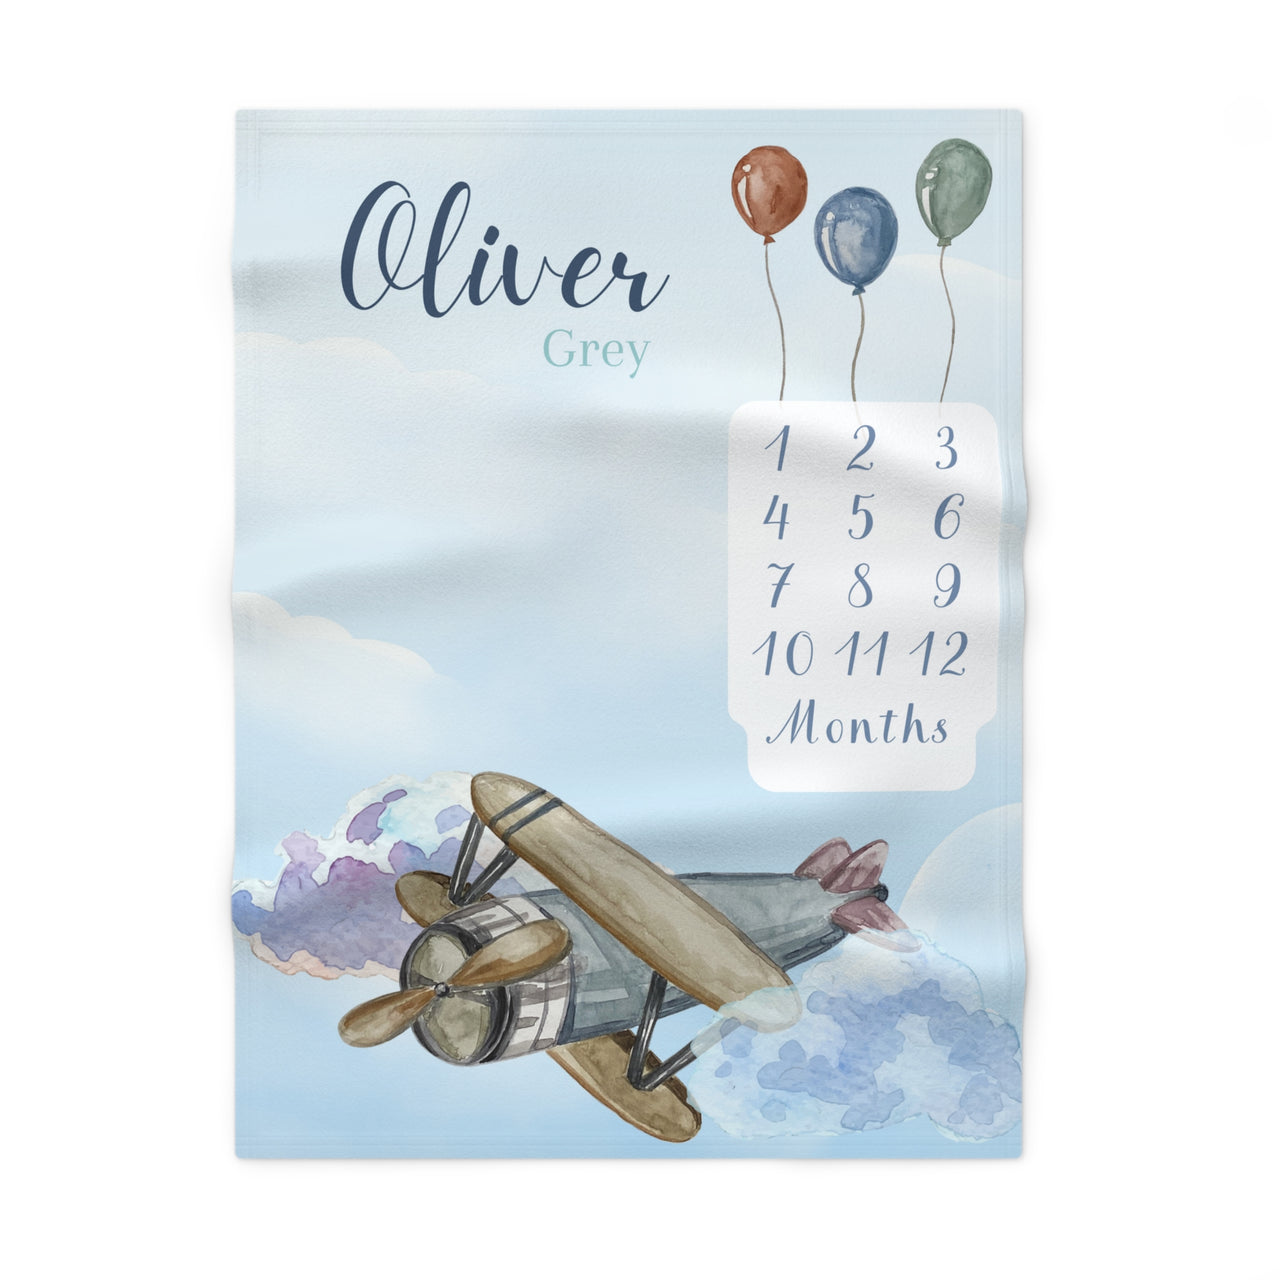 Airplane Themed Soft Fleece Milestone Blanket, Boys Monthly Growth Tracker, Personalized Baby Blanket, Baby Shower Gift, Newborn Baby Gift